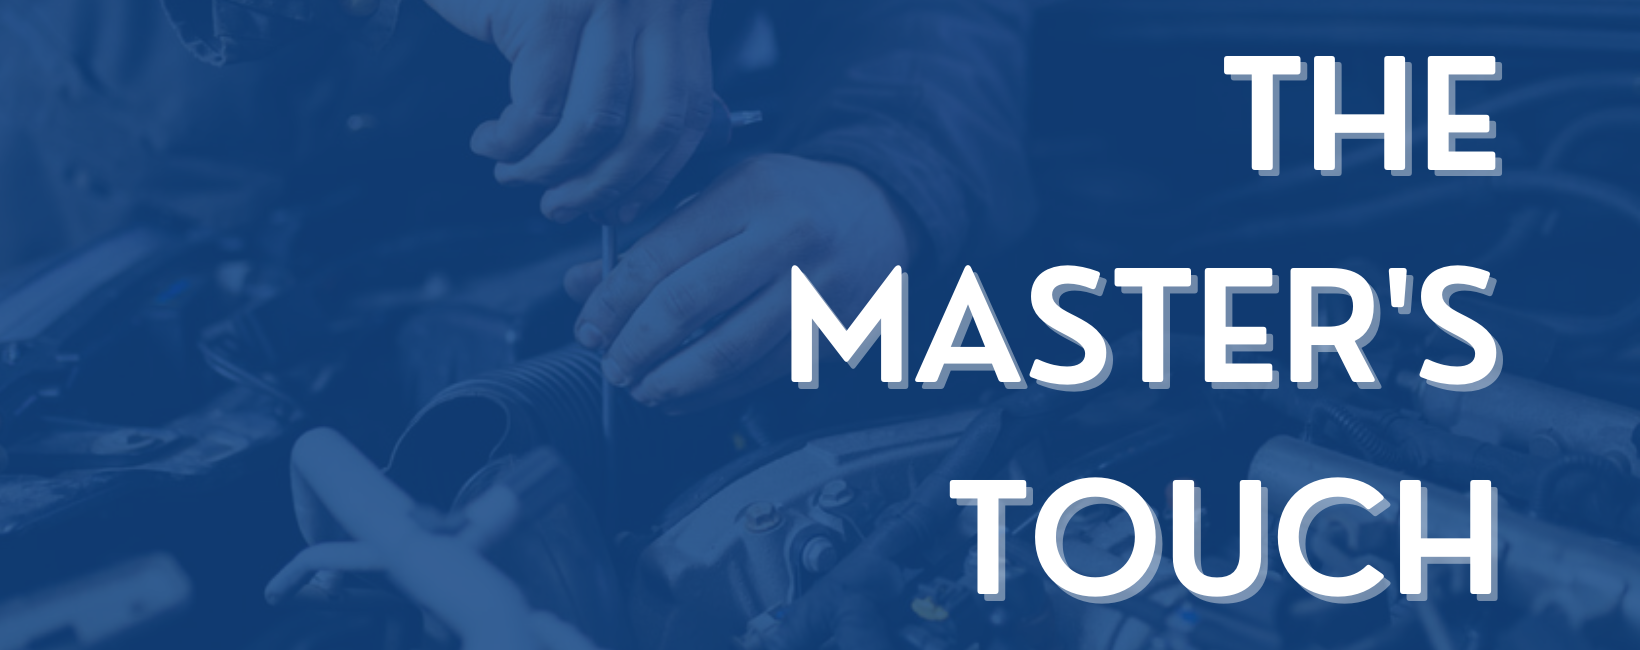 The Master’s Touch Professional Auto Repair 3